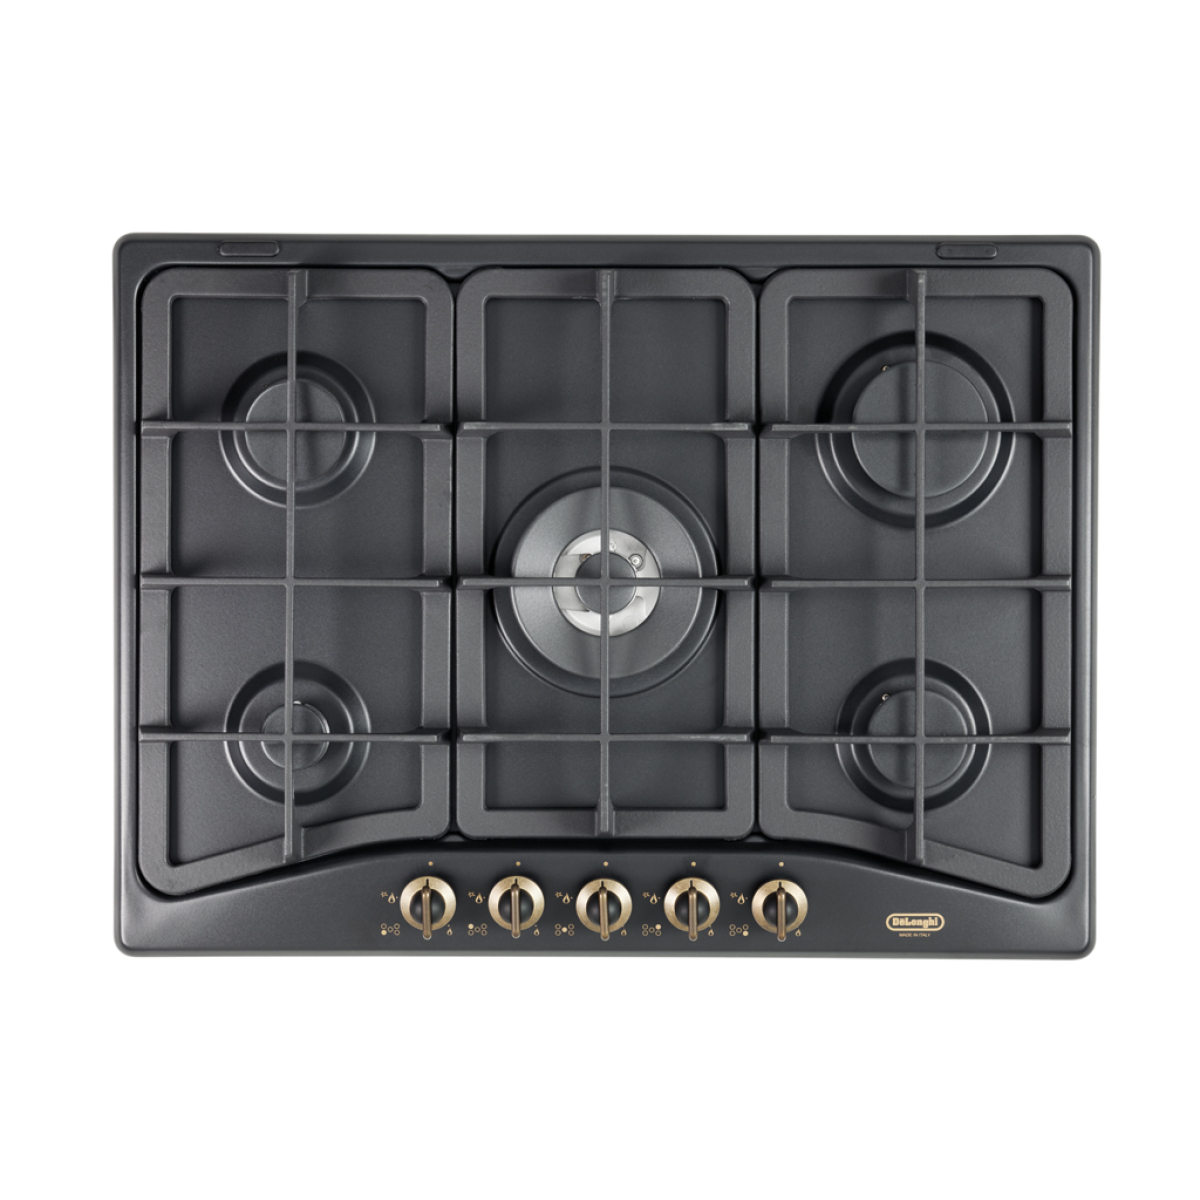 DeLonghi ANF 57 PRO plaque Anthracite Built-in (placement) Gaz 5 zone(s)